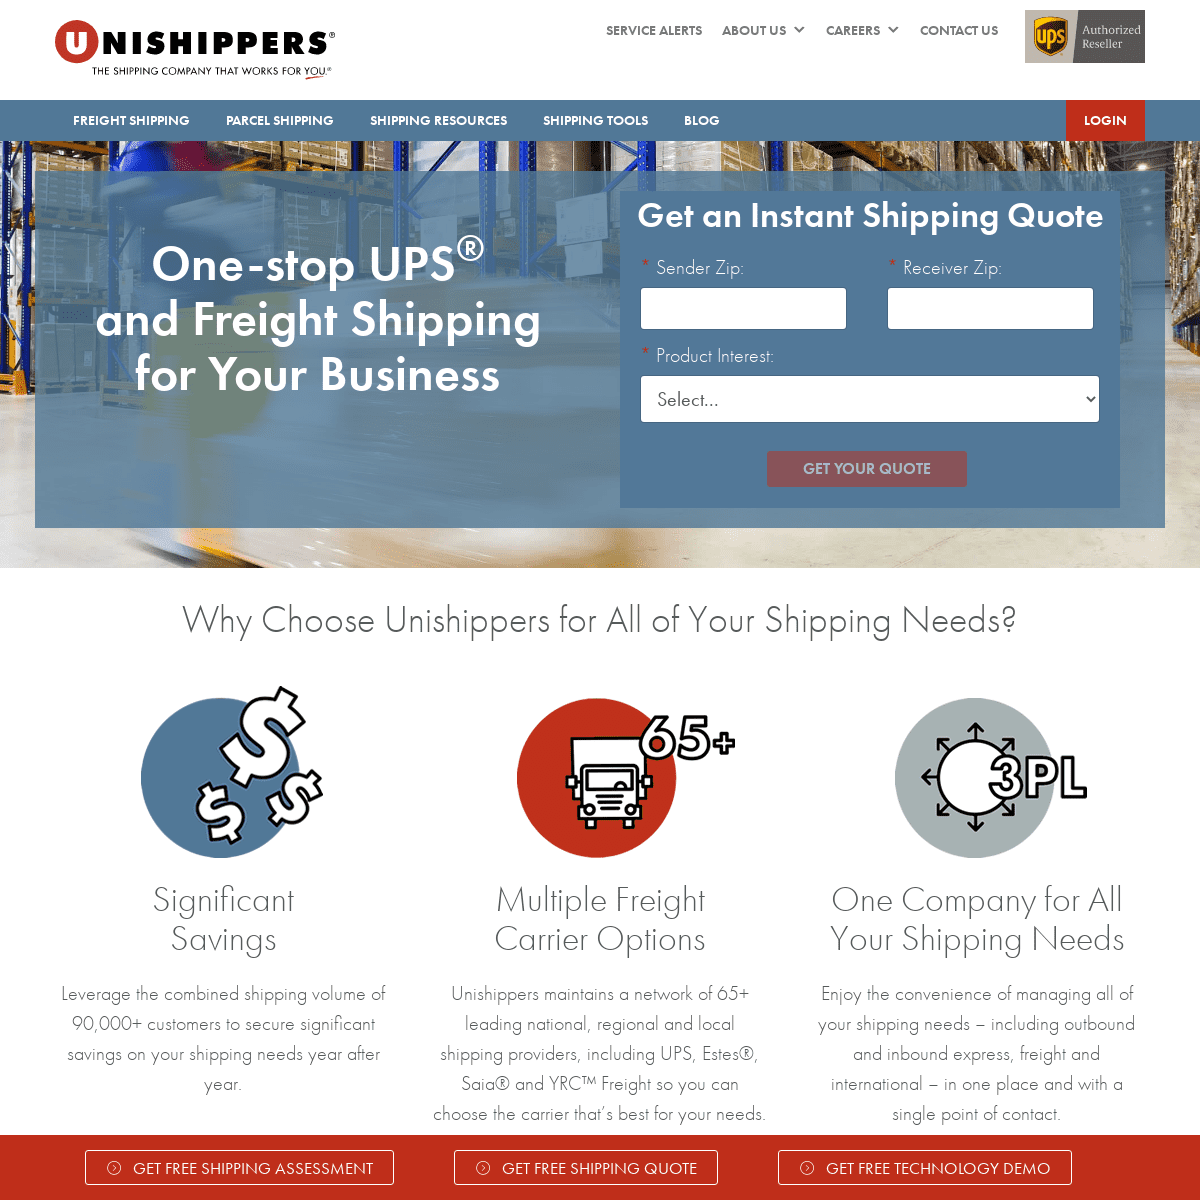 Unishippers - 3PL Freight Shipping & UPS Shipping Company